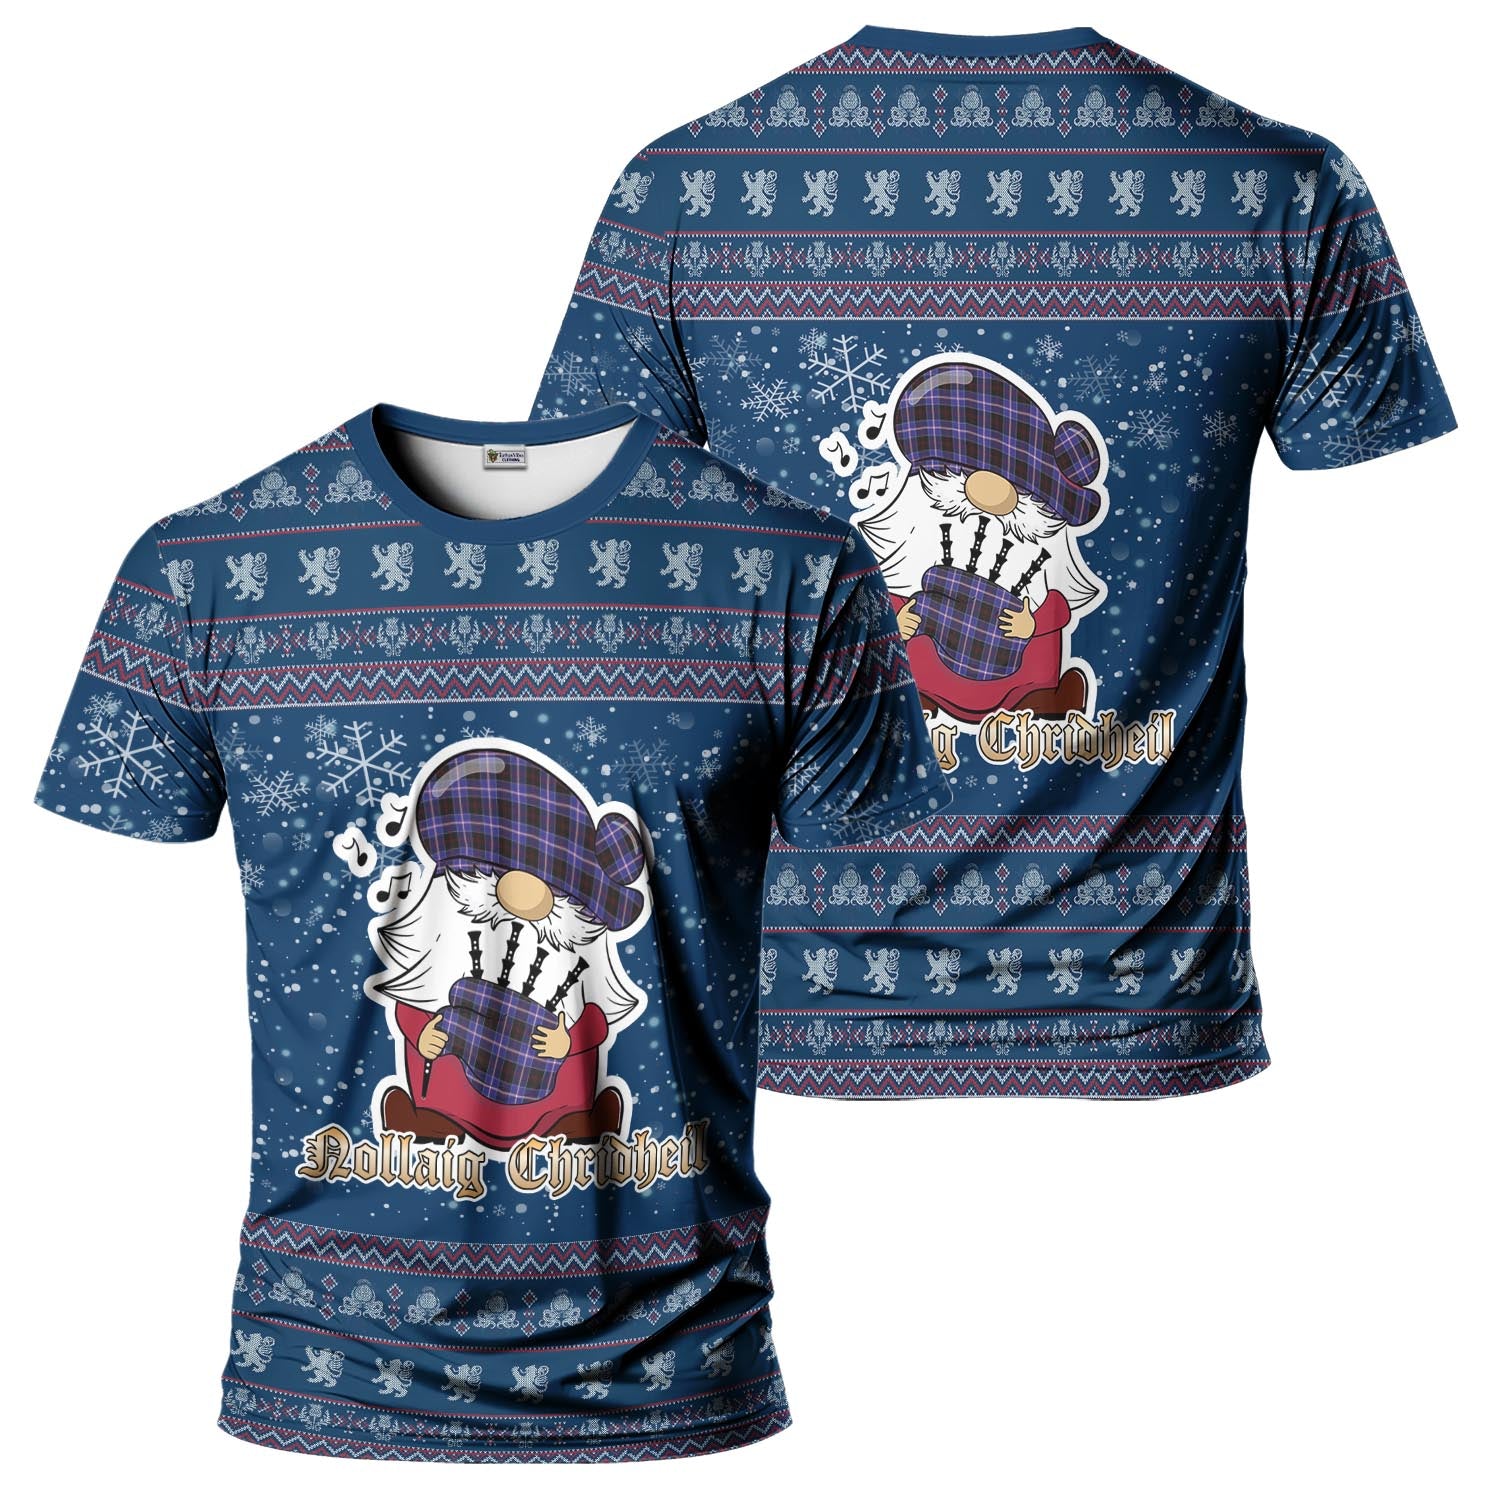 Dunlop Modern Clan Christmas Family T-Shirt with Funny Gnome Playing Bagpipes Kid's Shirt Blue - Tartanvibesclothing